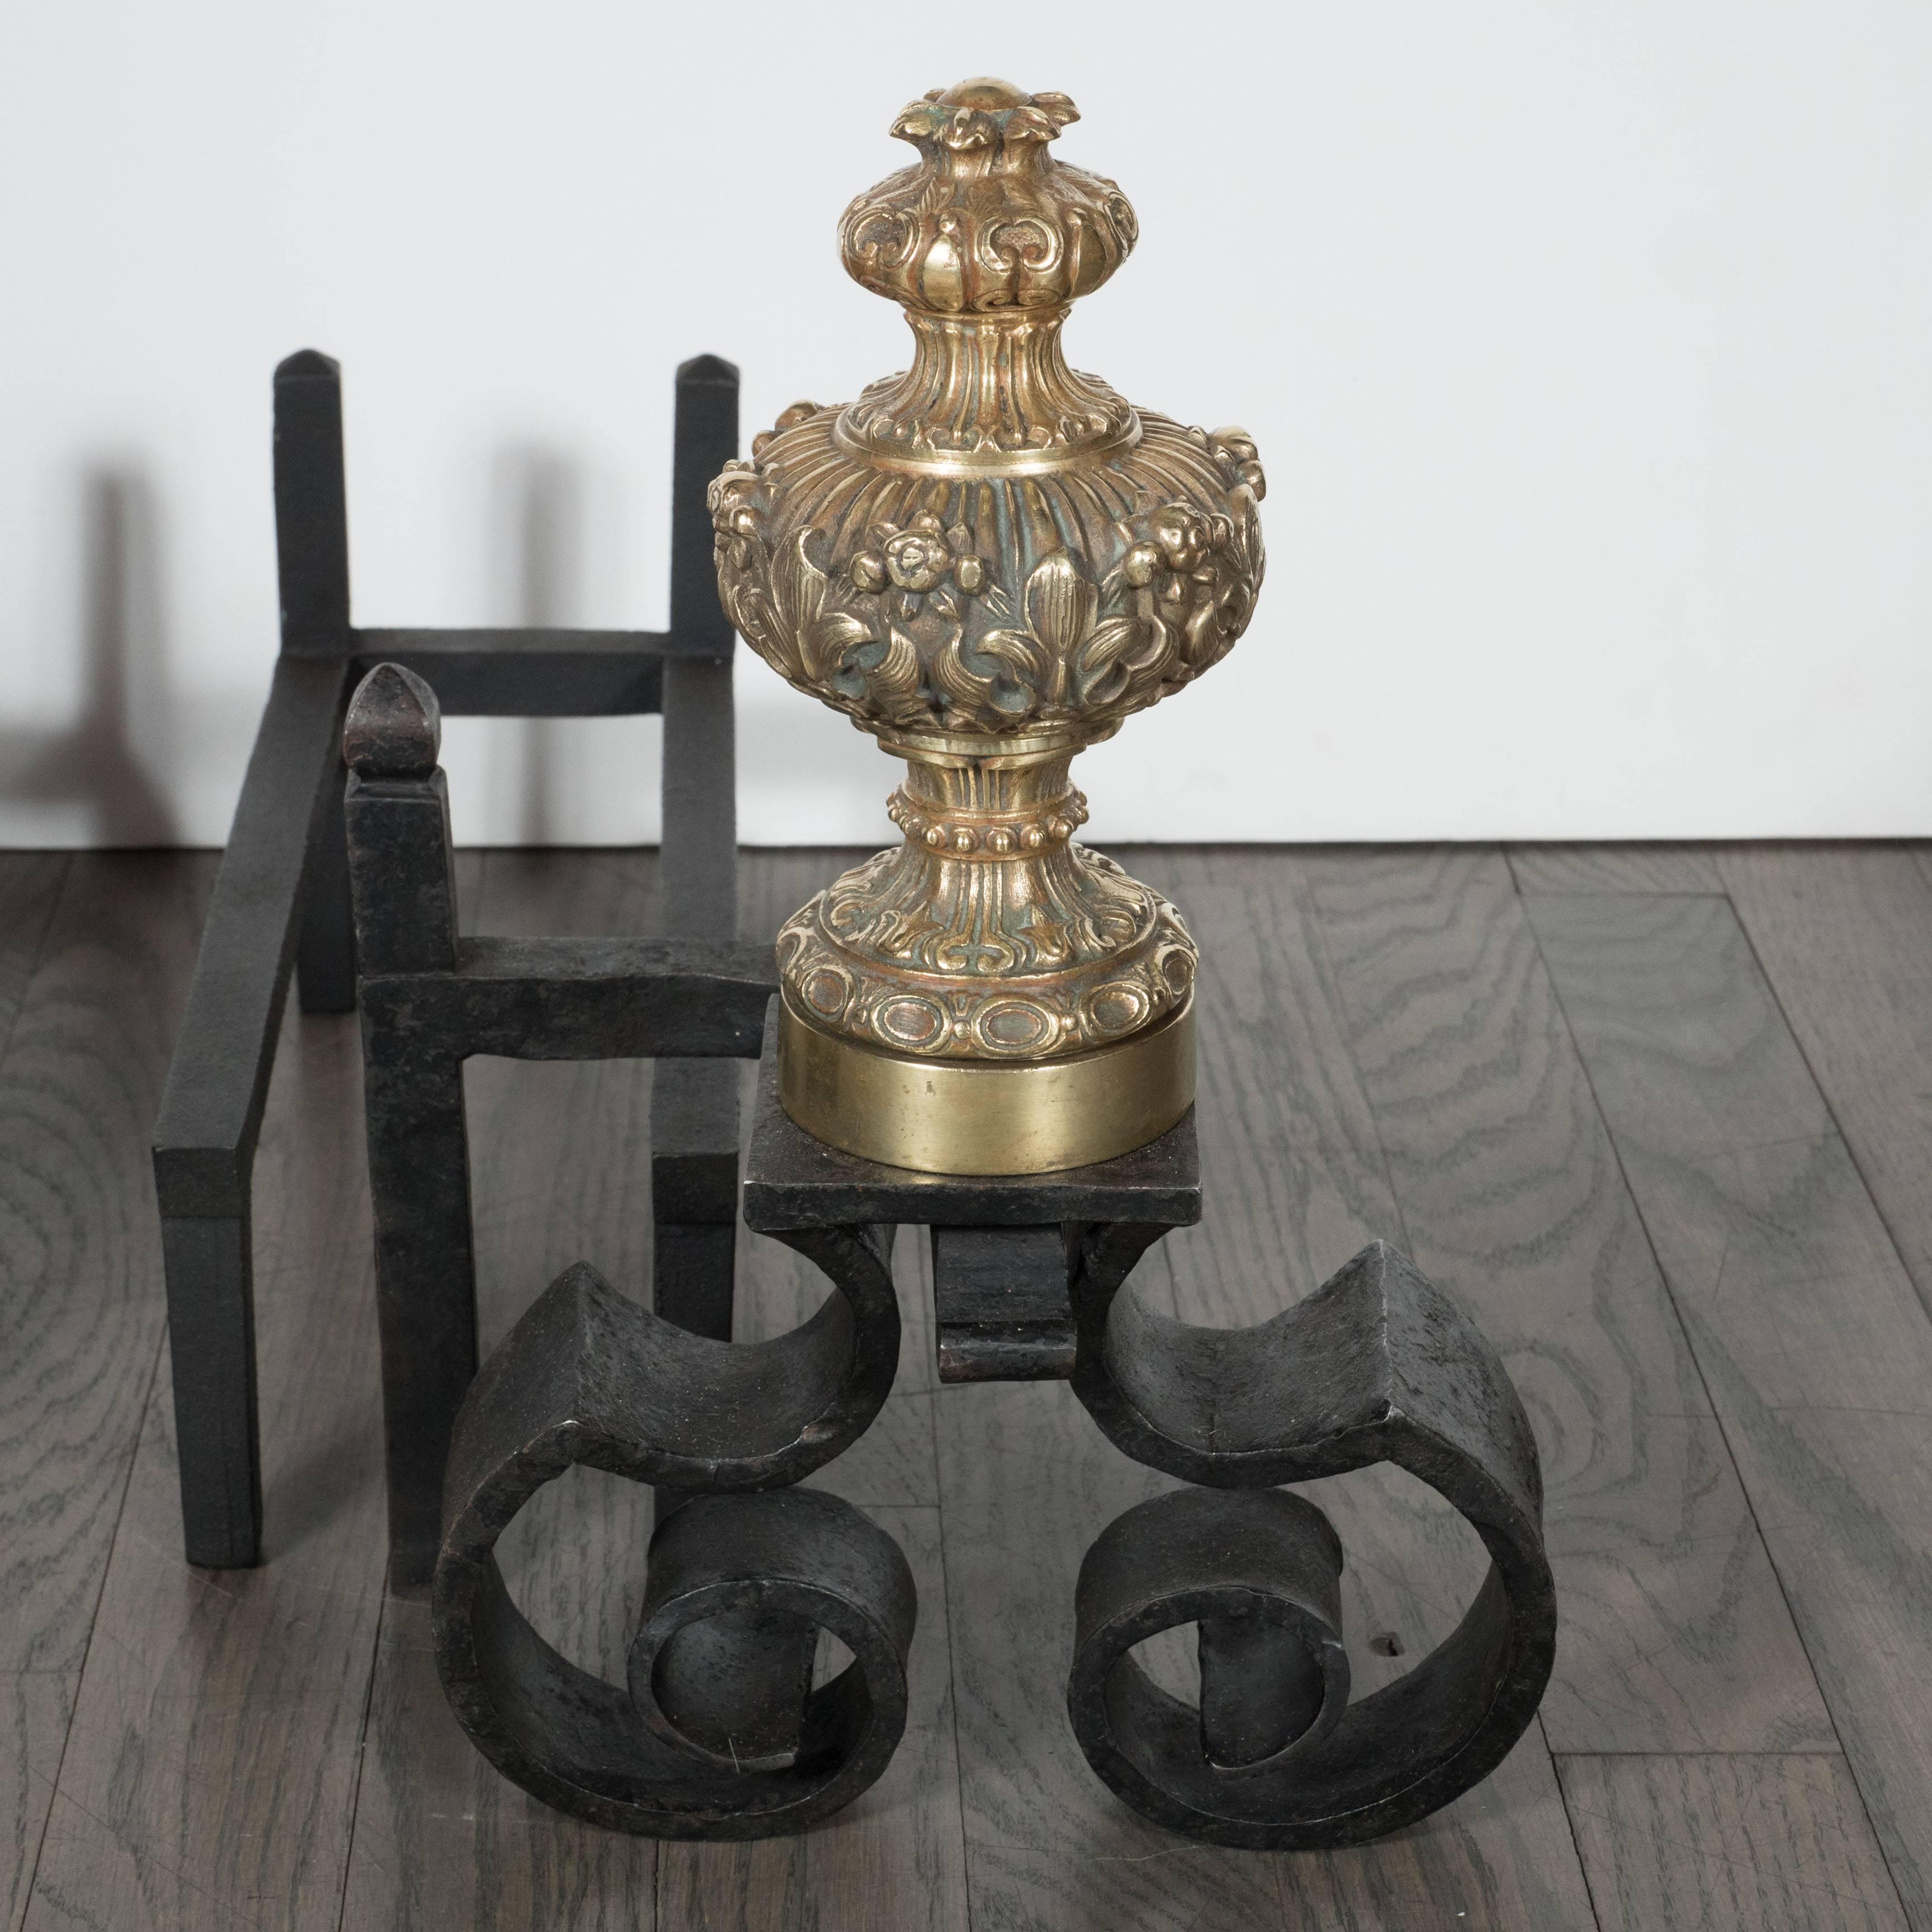 This elegant neoclassical Baroque andirons feature a hand-forged scroll design base in handwrought iron with solid brass finials featuring baroque patterns as well as a stylized acanthus motif. Marked made in France on the underside. With their